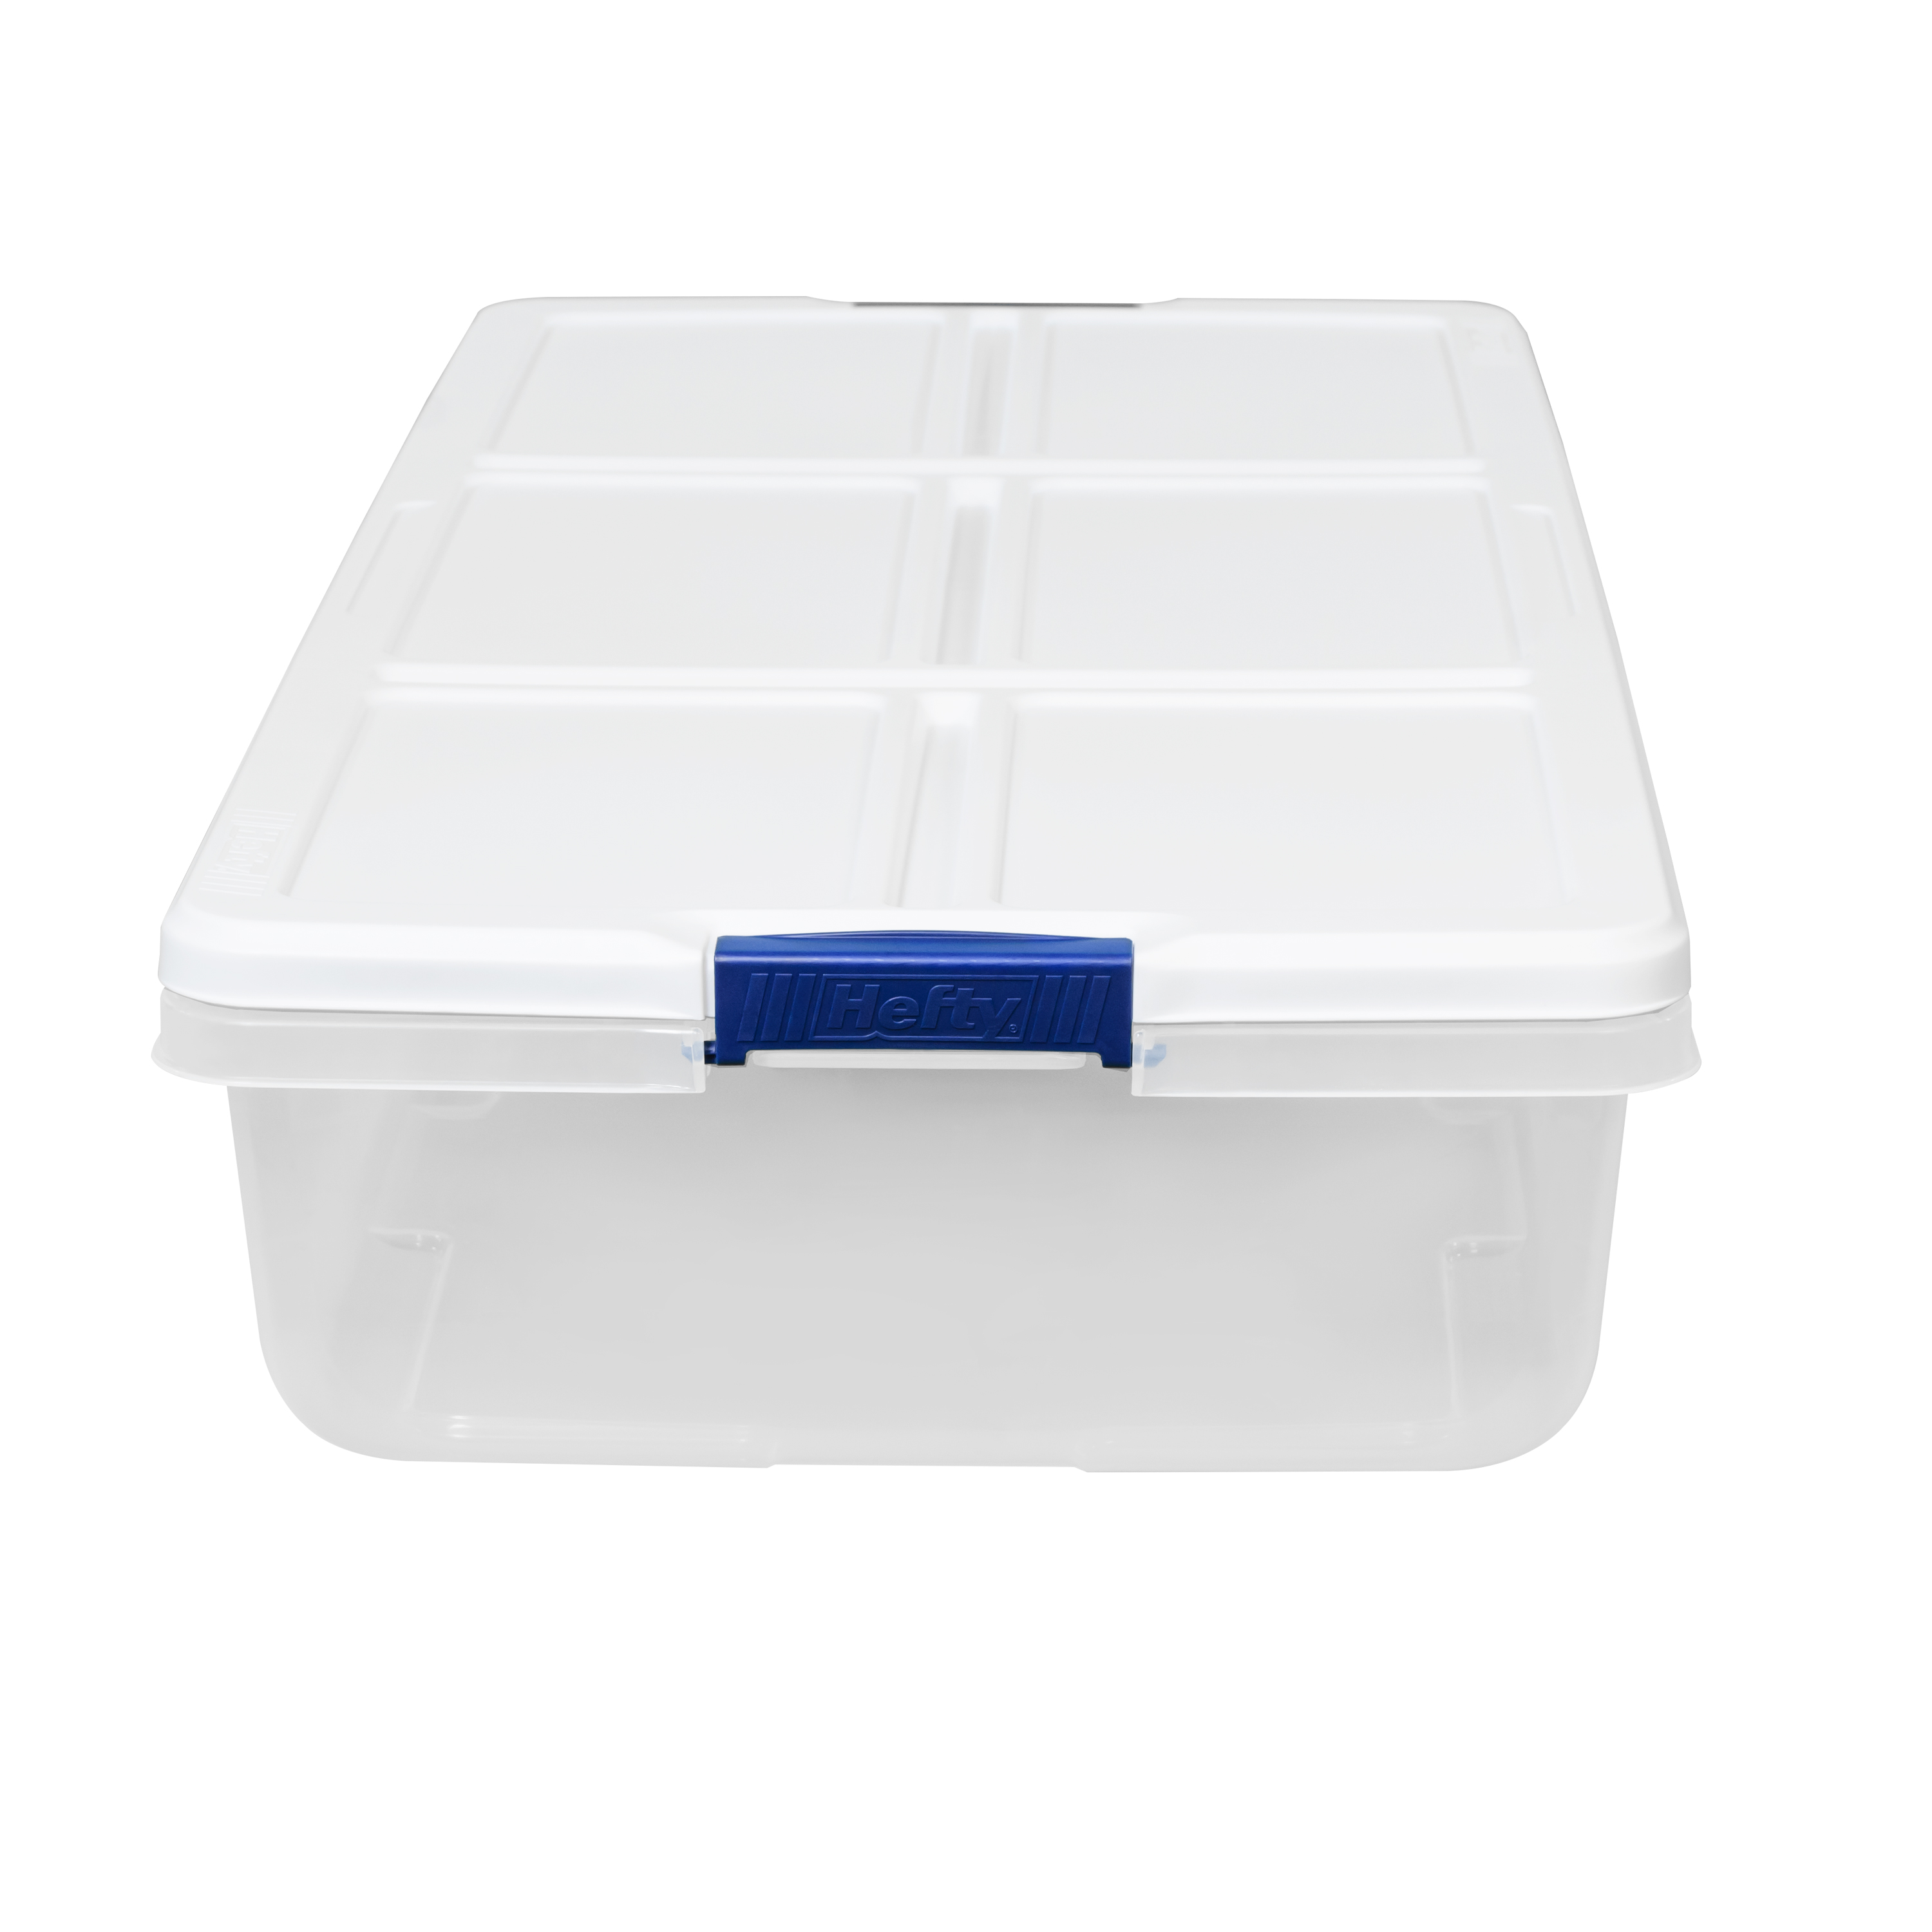 52-qt Hefty Latched Storage Bin, White Lid with Blue Handles - image 2 of 5